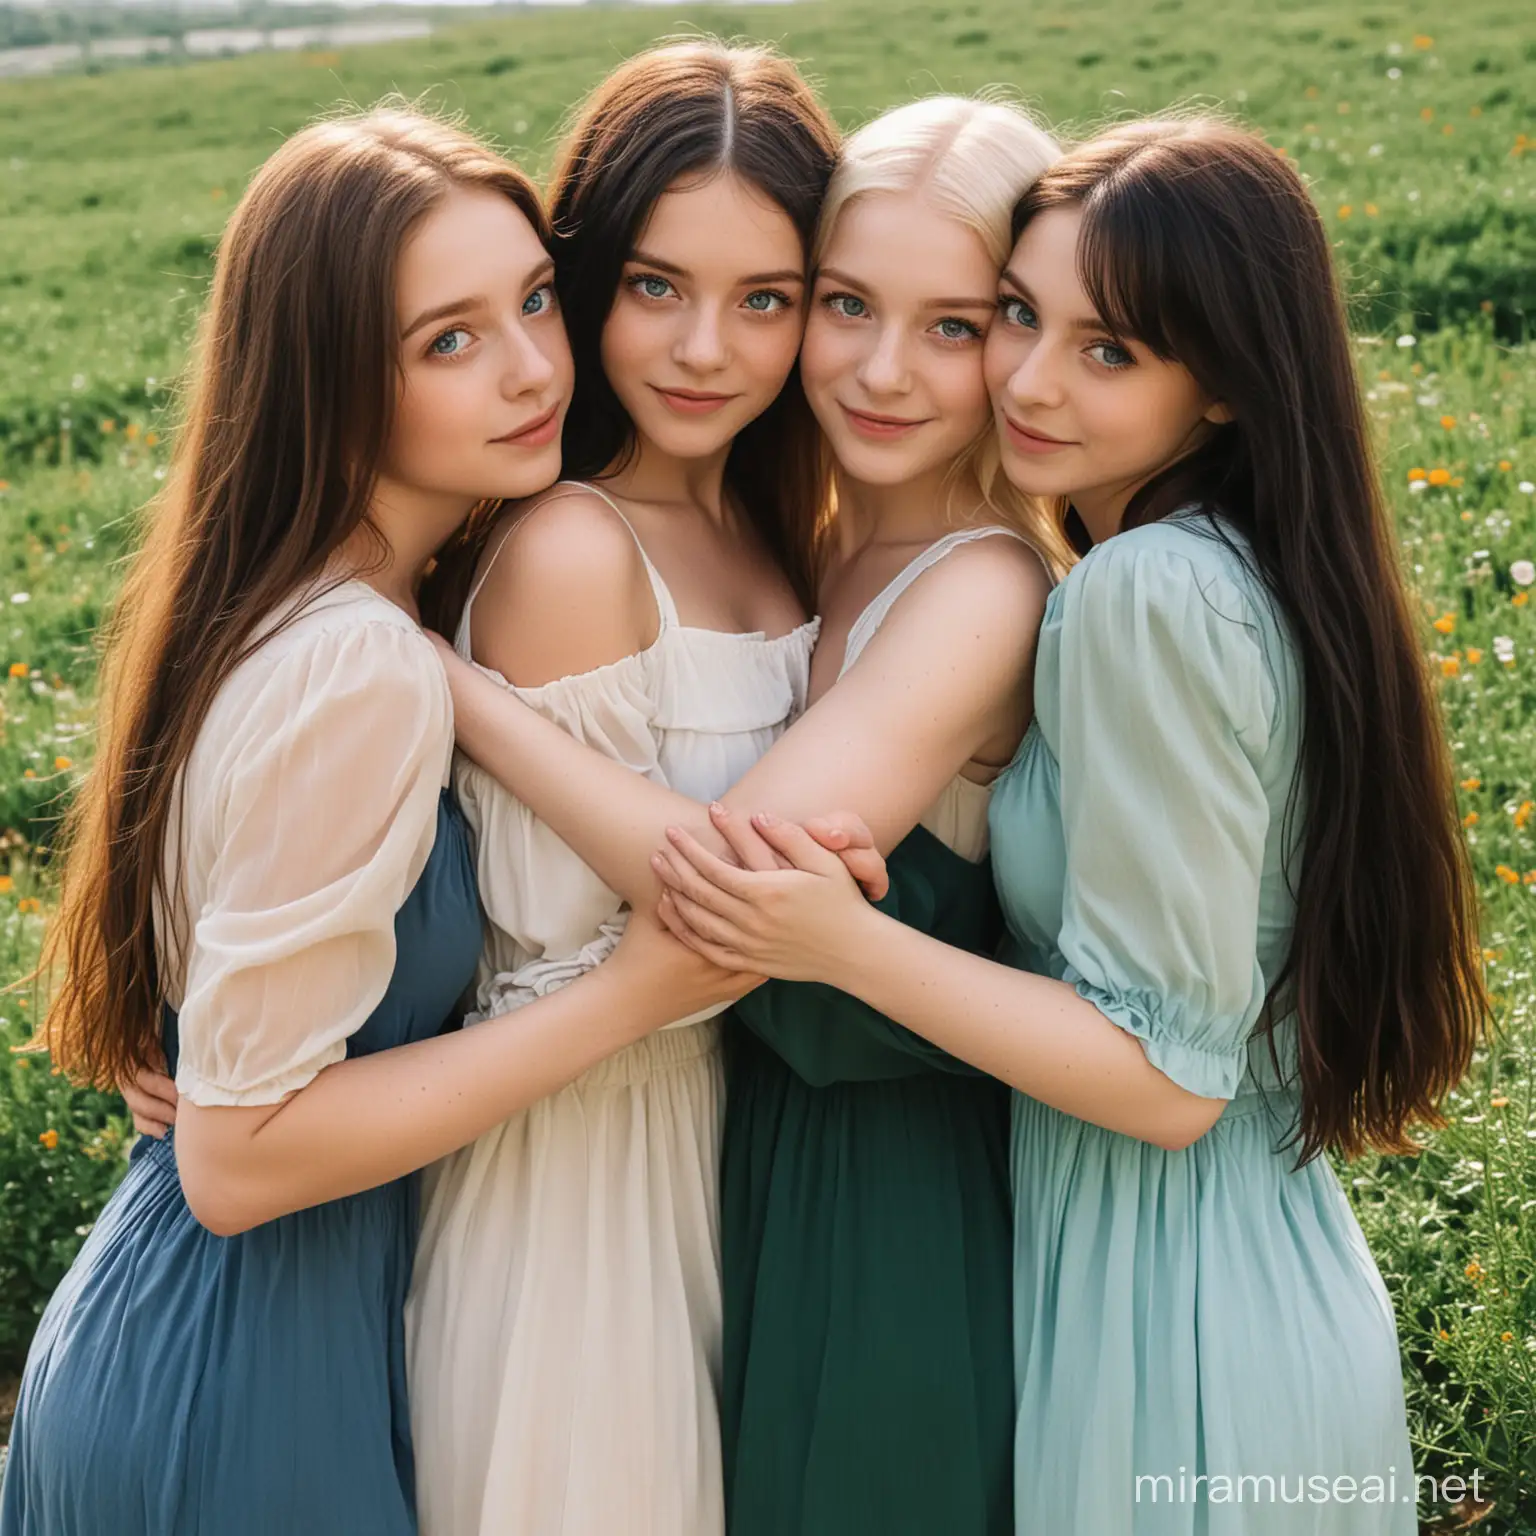 Four Sisters Embracing in SoftColored Dresses